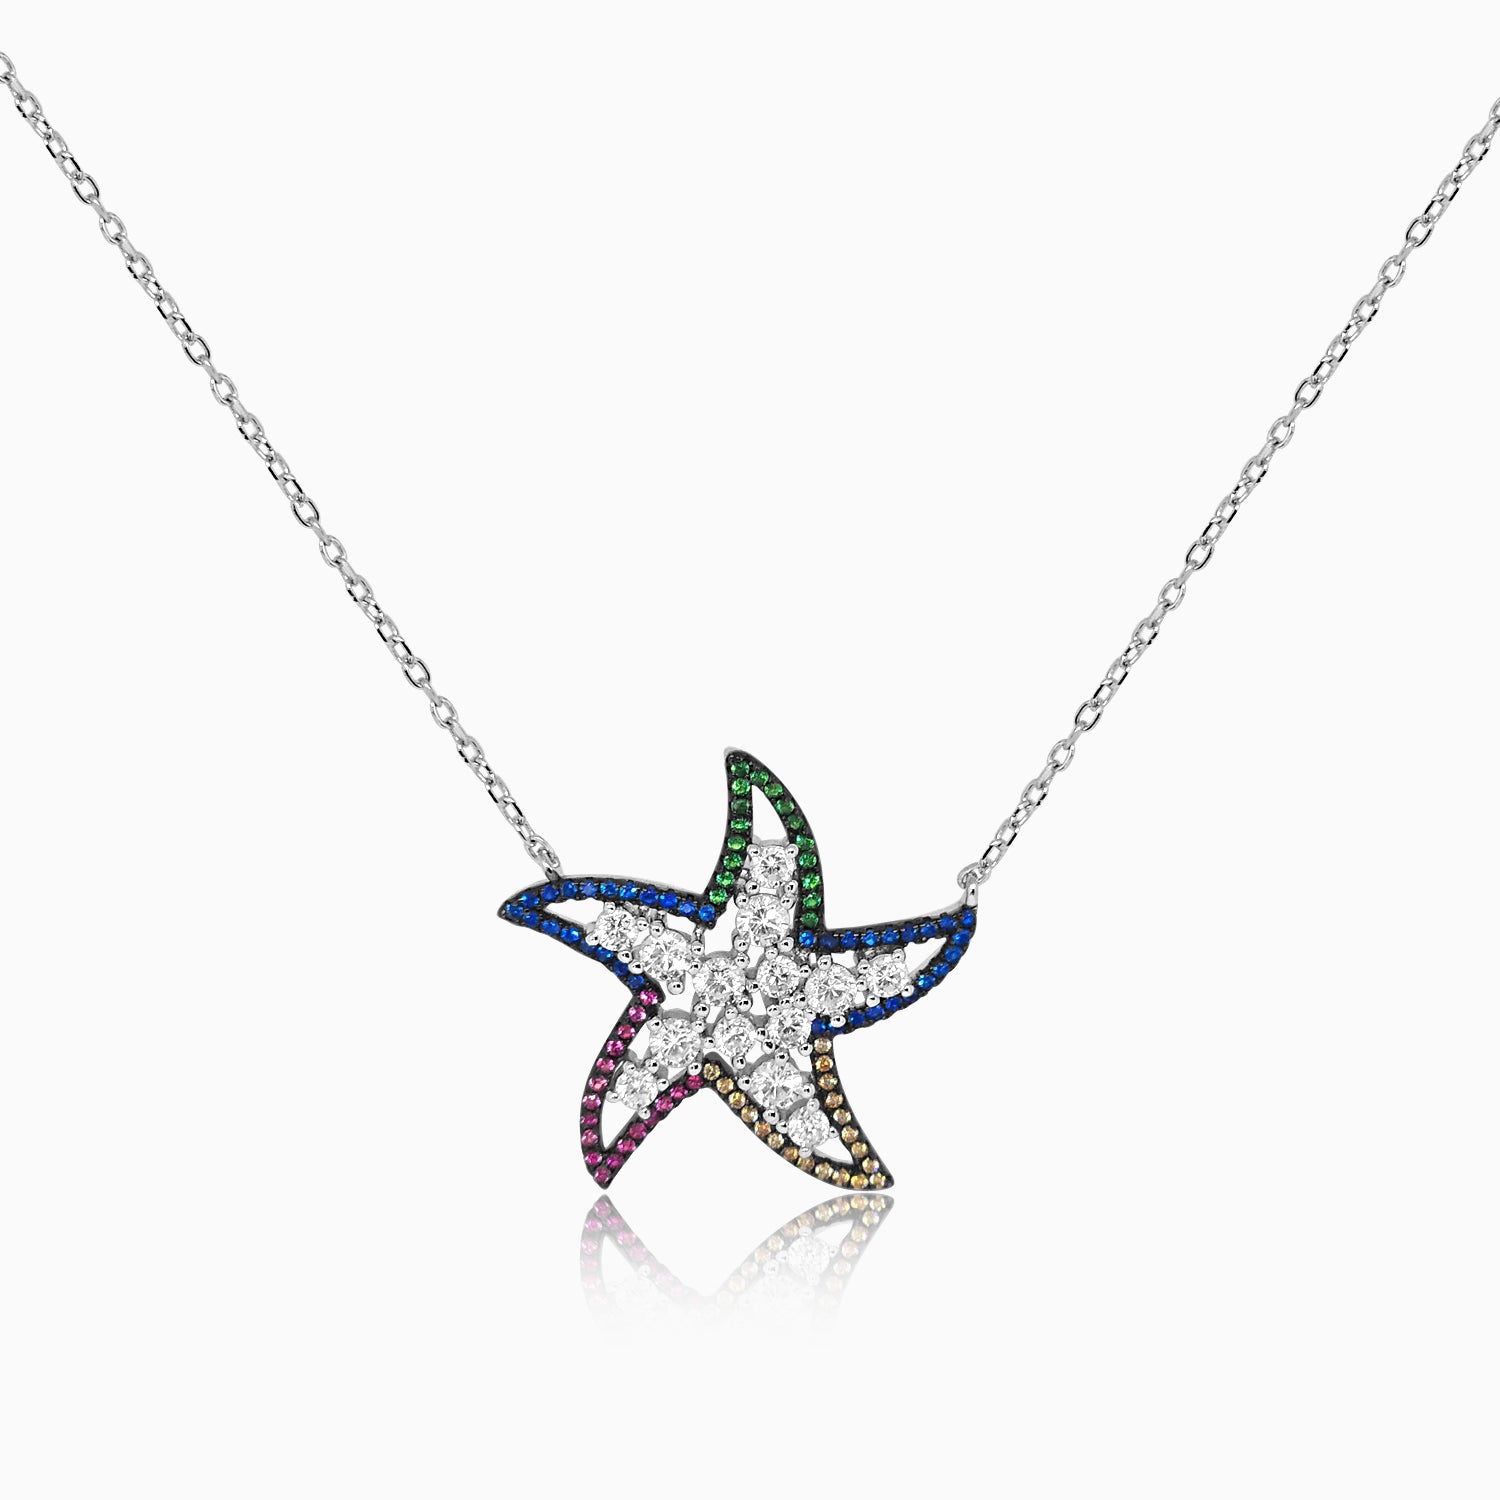 Silver Sparkling Star Fish Necklace